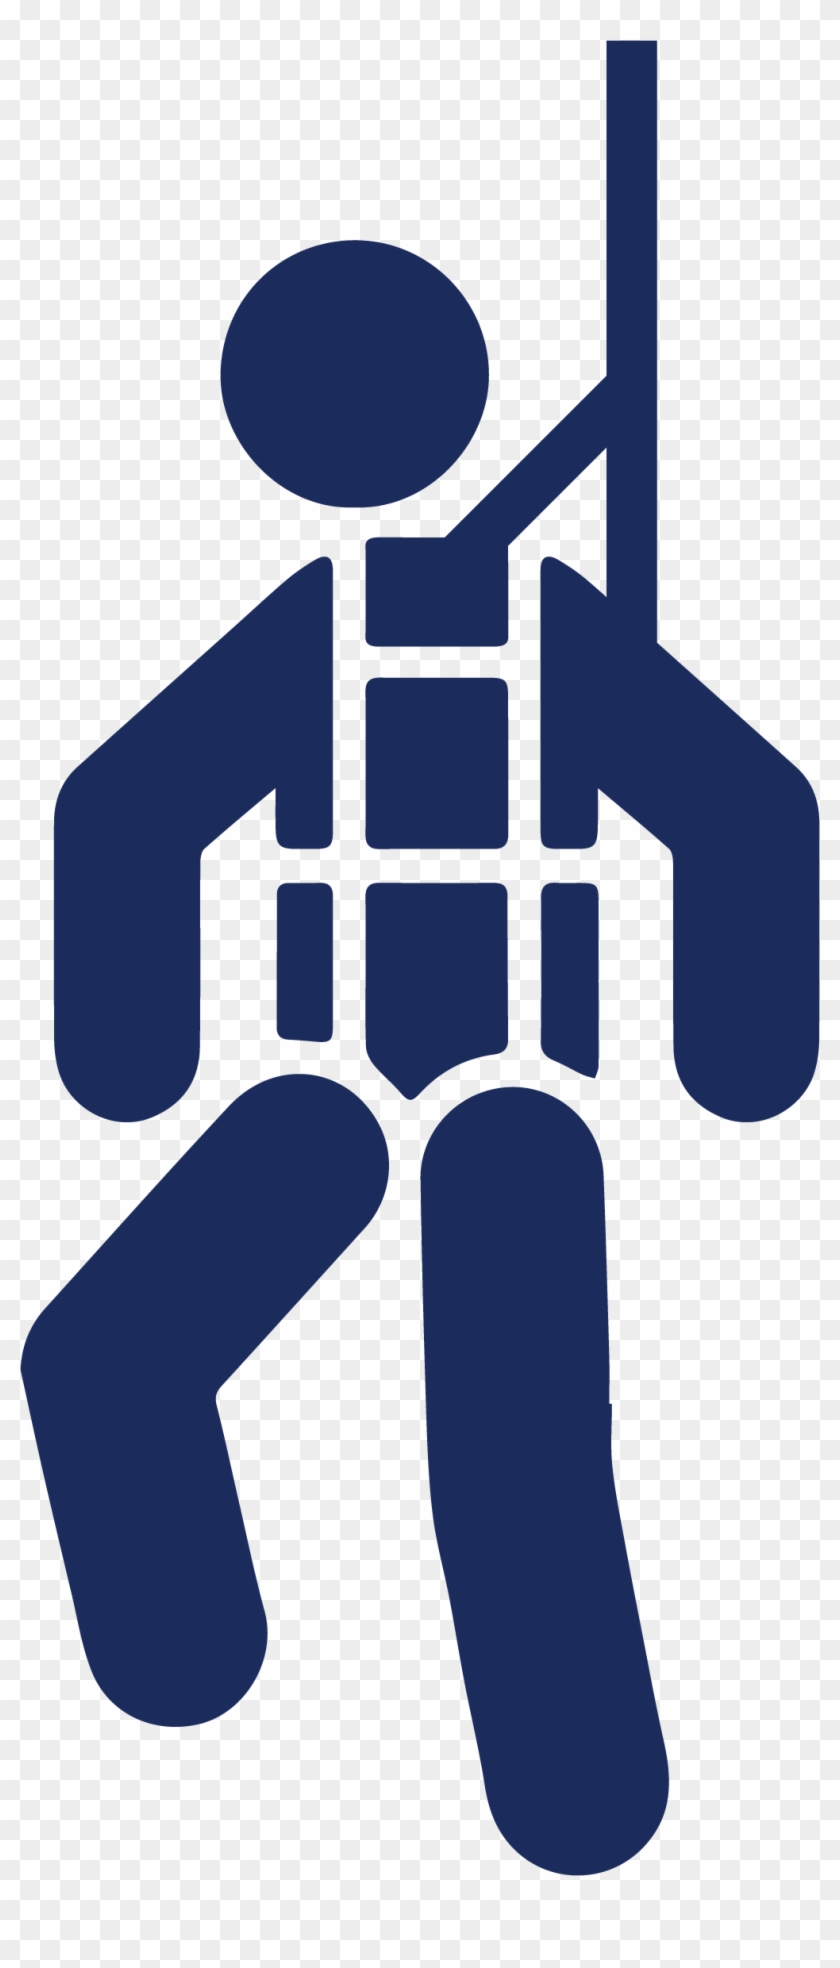 Fall Protection - Fall Protection Symbol Clipart #5742727